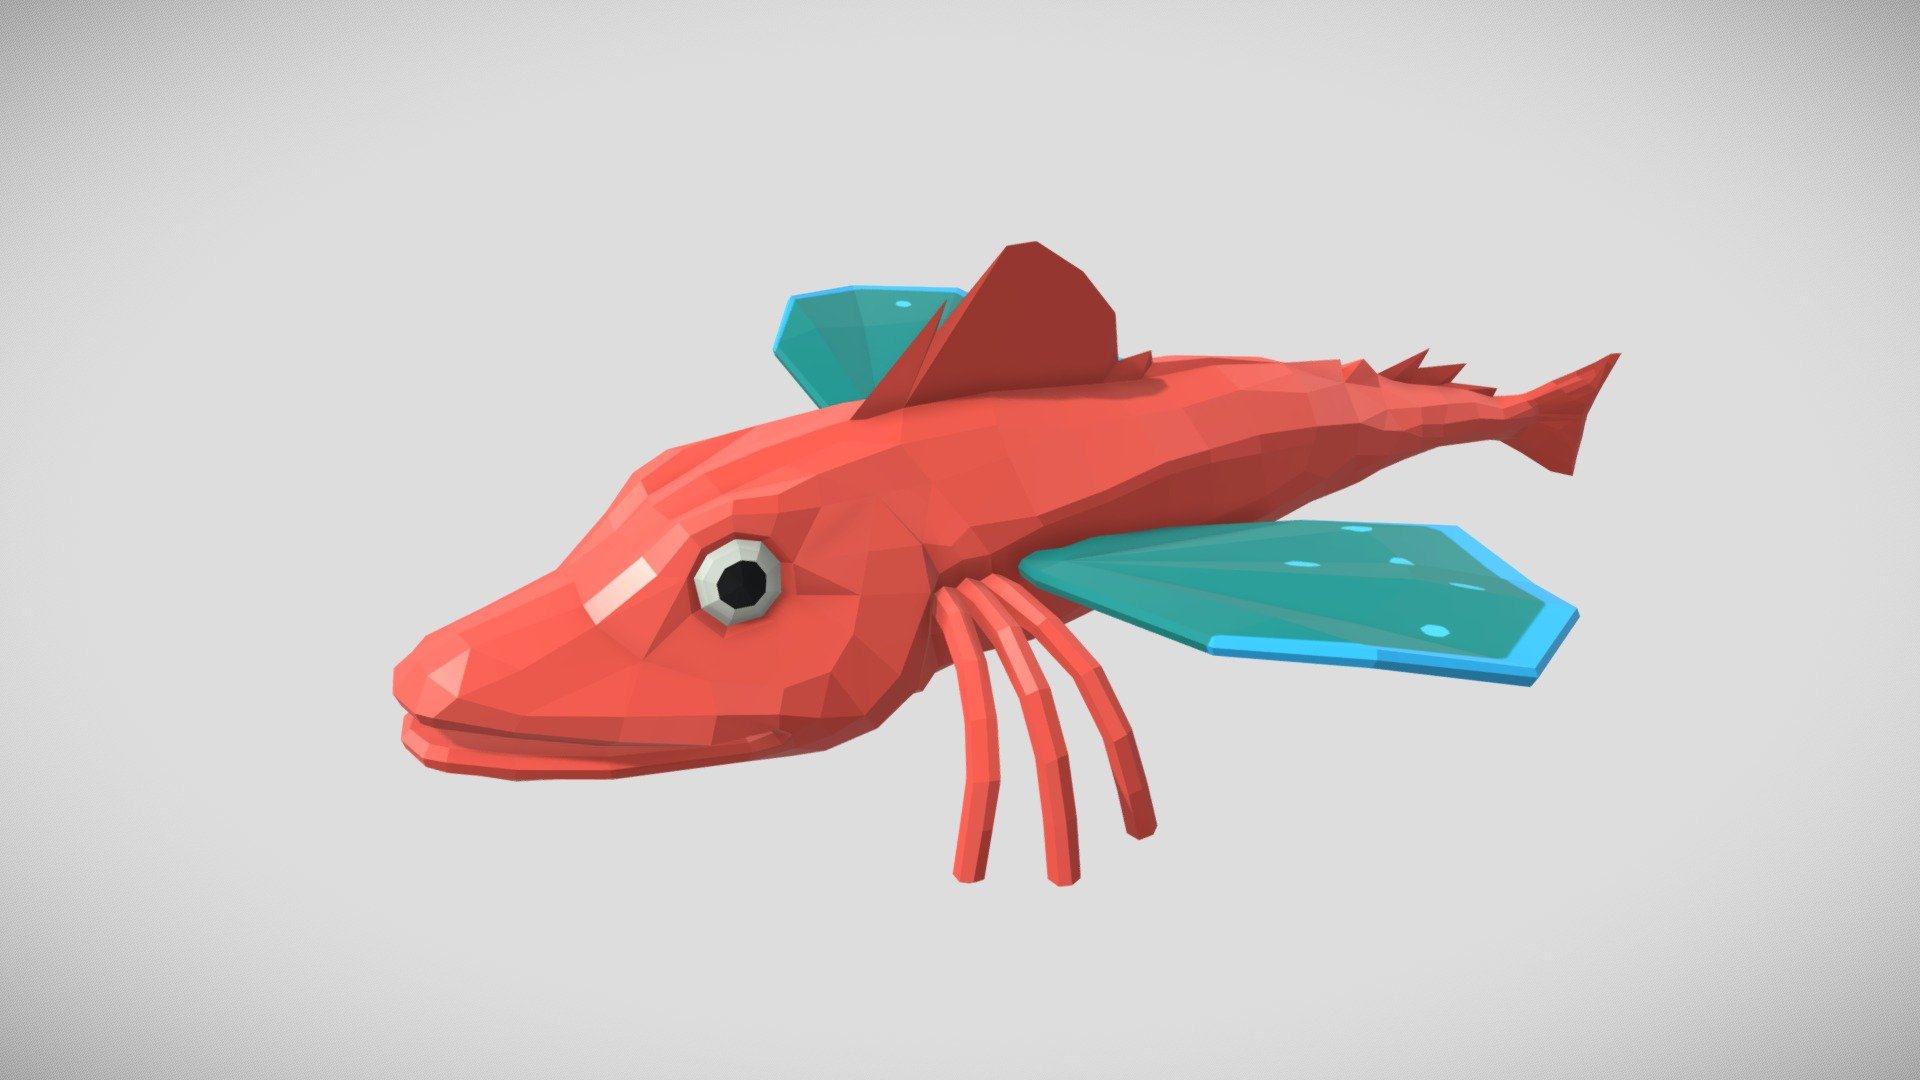 Contents




Fully rigged sea animal

Essential animations

Simple and easy-to-use design

Animations




Swim

Flop

Walk

A blender file of the sea animal's included. You can use the rig, create and adjust animations as you like.

Thank you so much for your interest. Our goal is to create assets that are useful and practical for your project! If you have any question or suggestion, please send us an email to customersupport@jiffycrew.com. We'll be more than happy to help 3d model